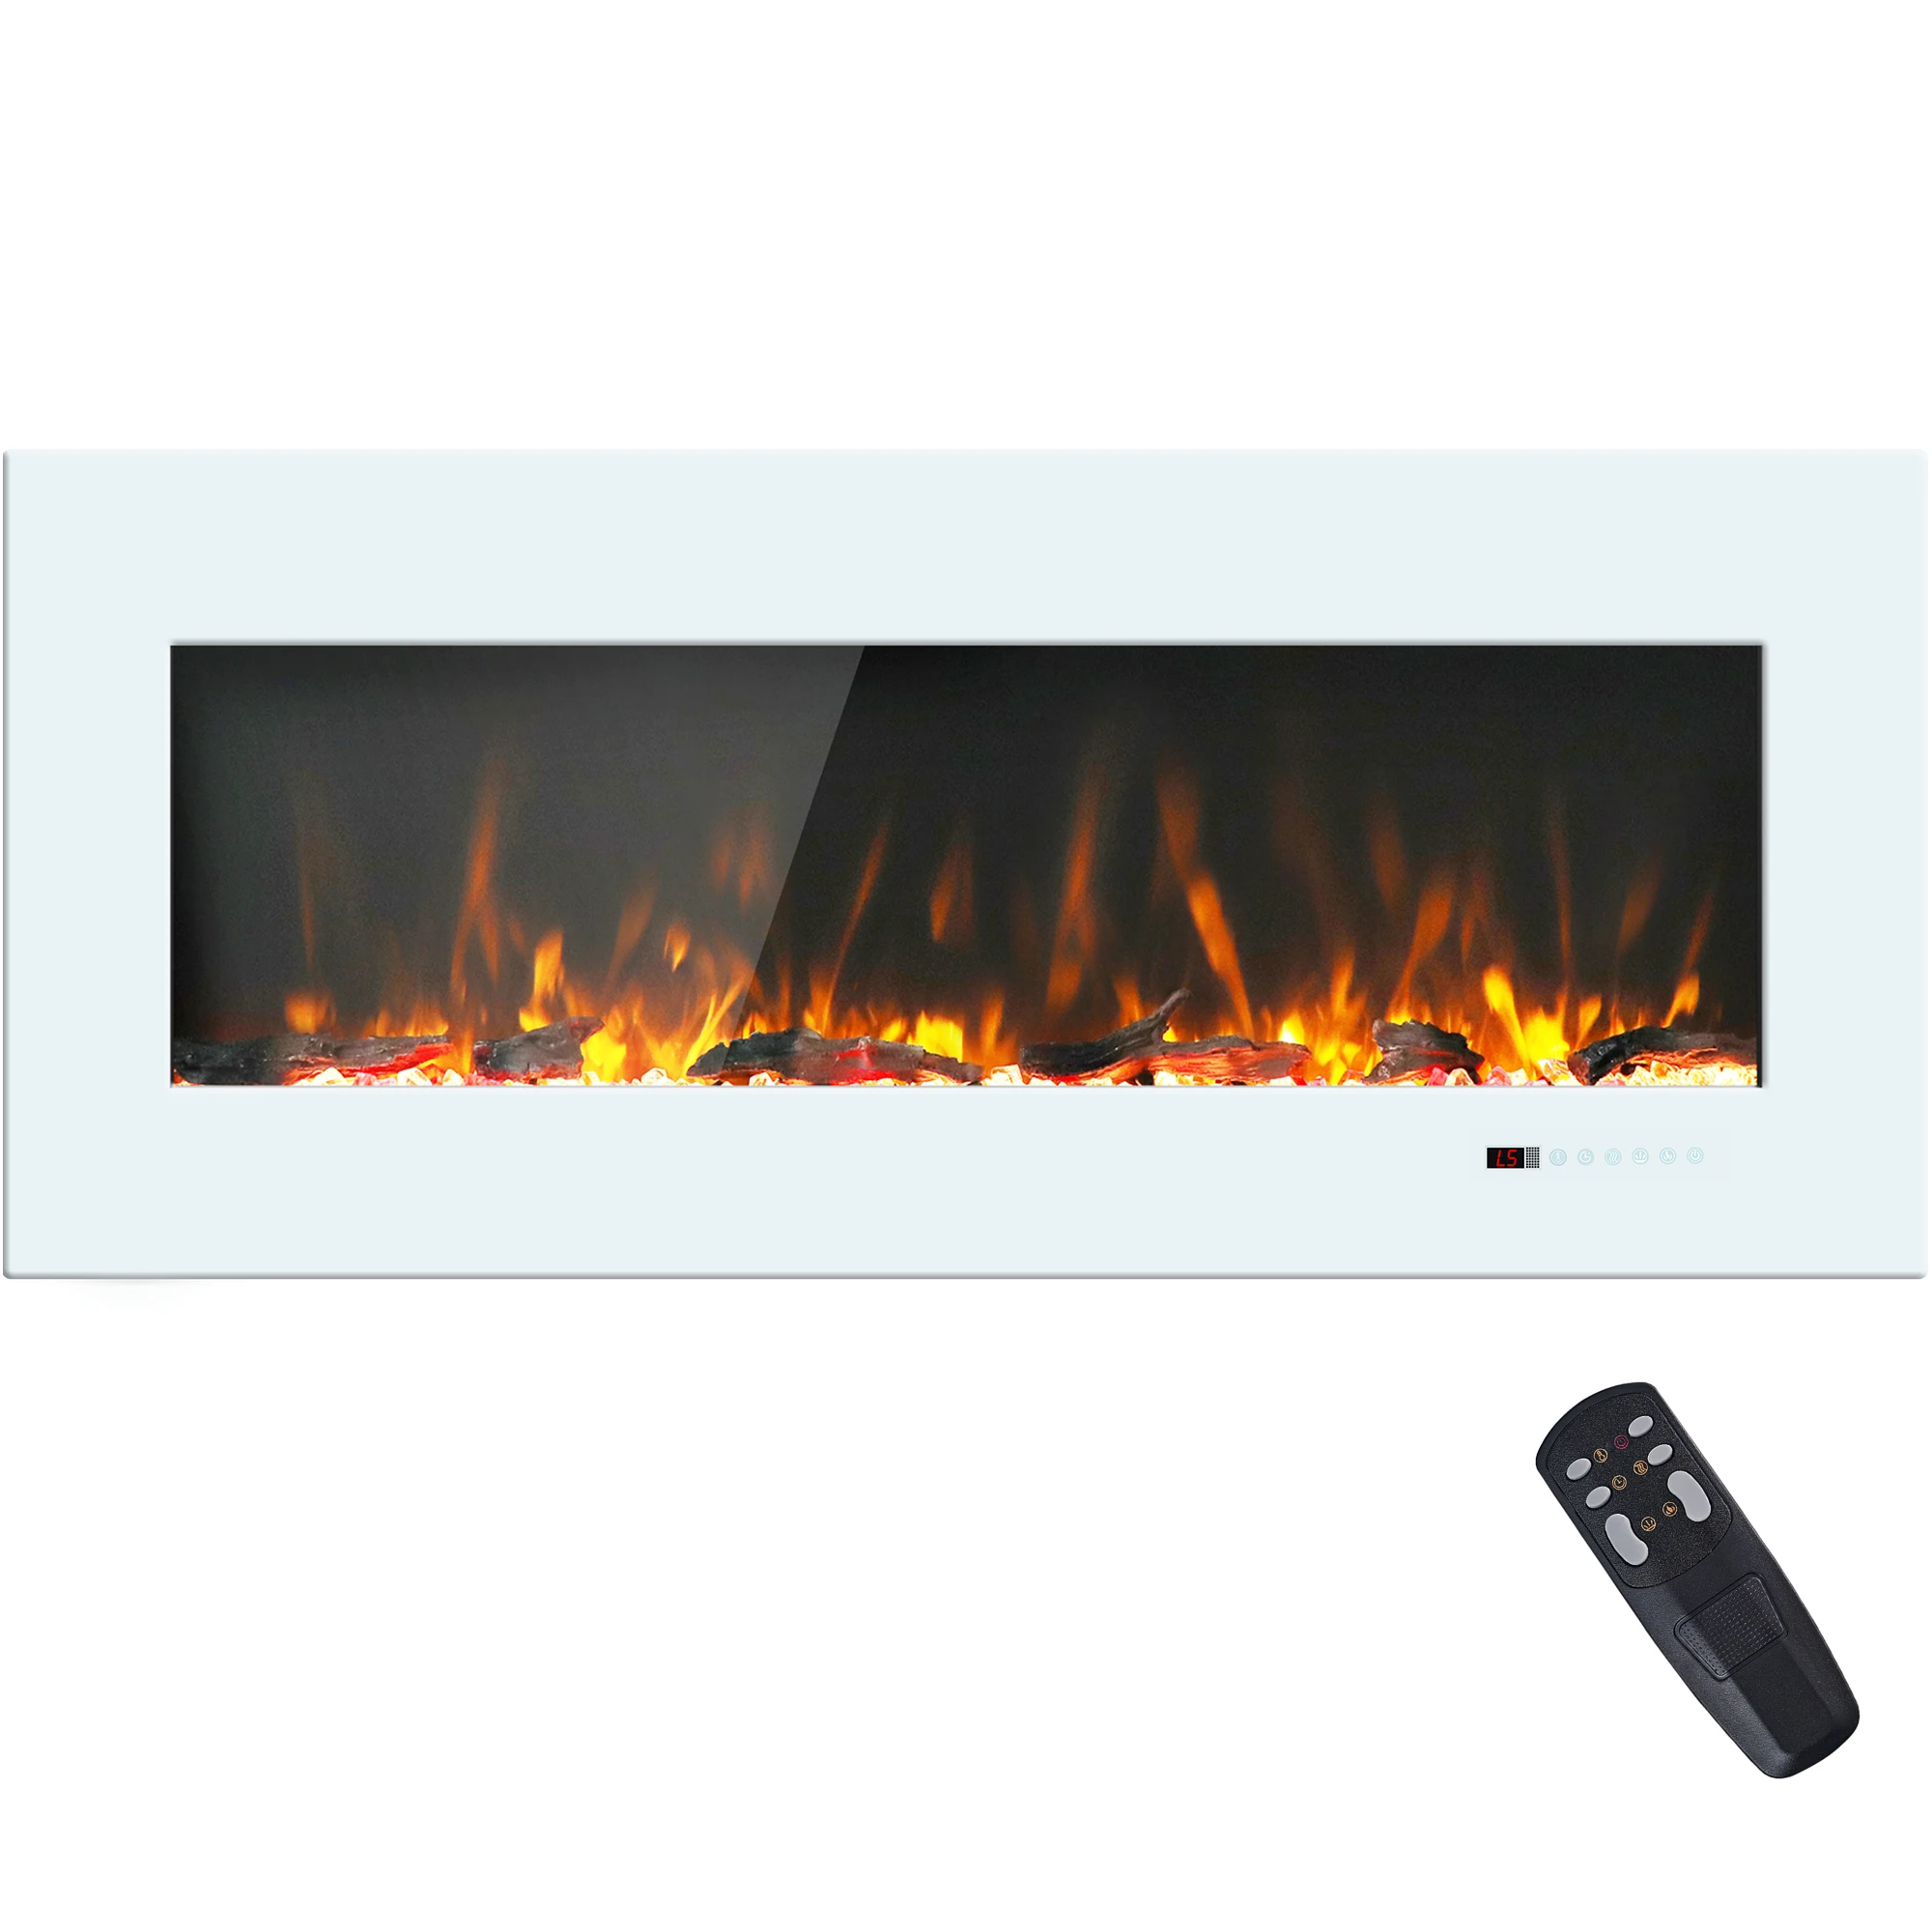 Luxstar 50 Inch White Electric Fireplace Heaters Wall Mounted Fireplace Not for Recessed Touch Screen Remote Control Home Heater